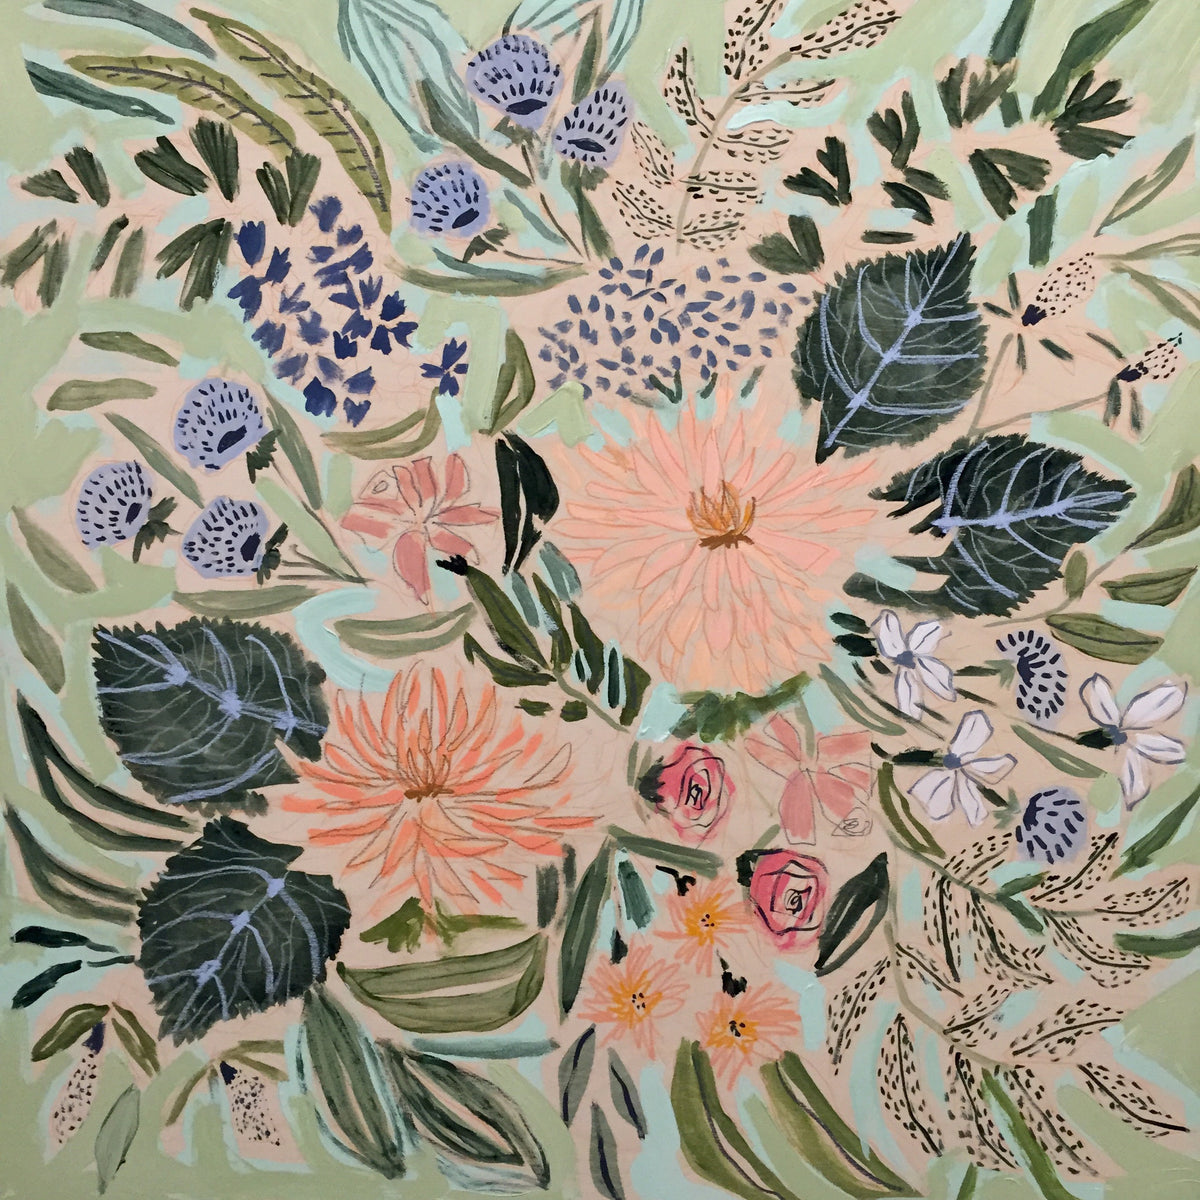 FLOWERS FOR KATE - 36x36